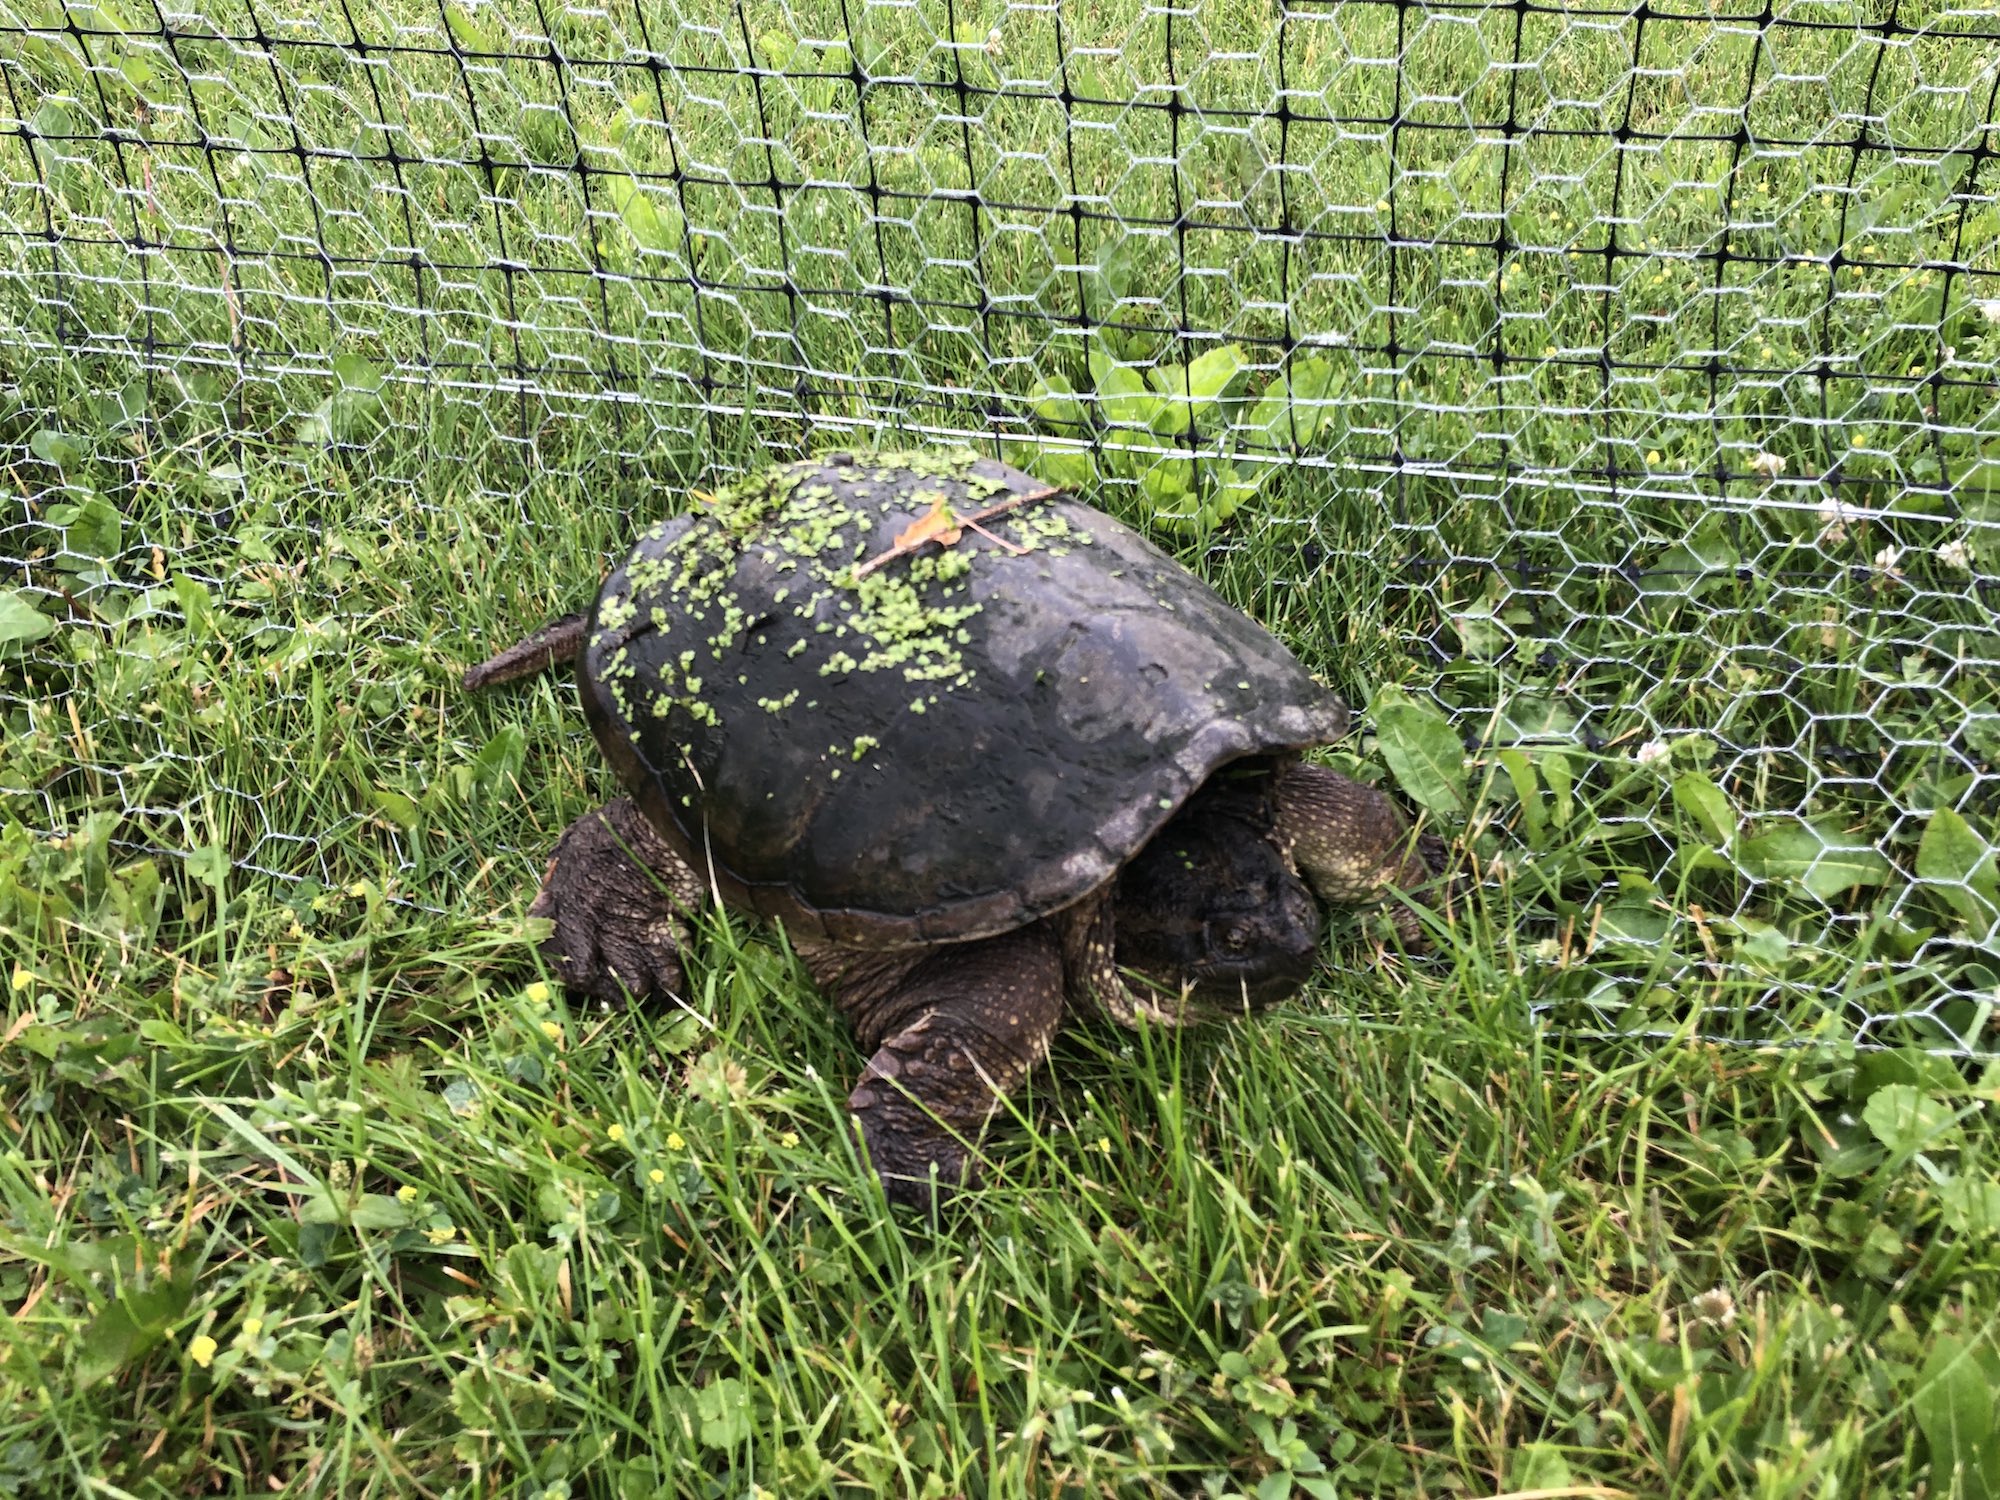 Snapping Turtle by Three Sisters Garden off of Monroe Street in Madison, Wisconsin on June 18, 2019.